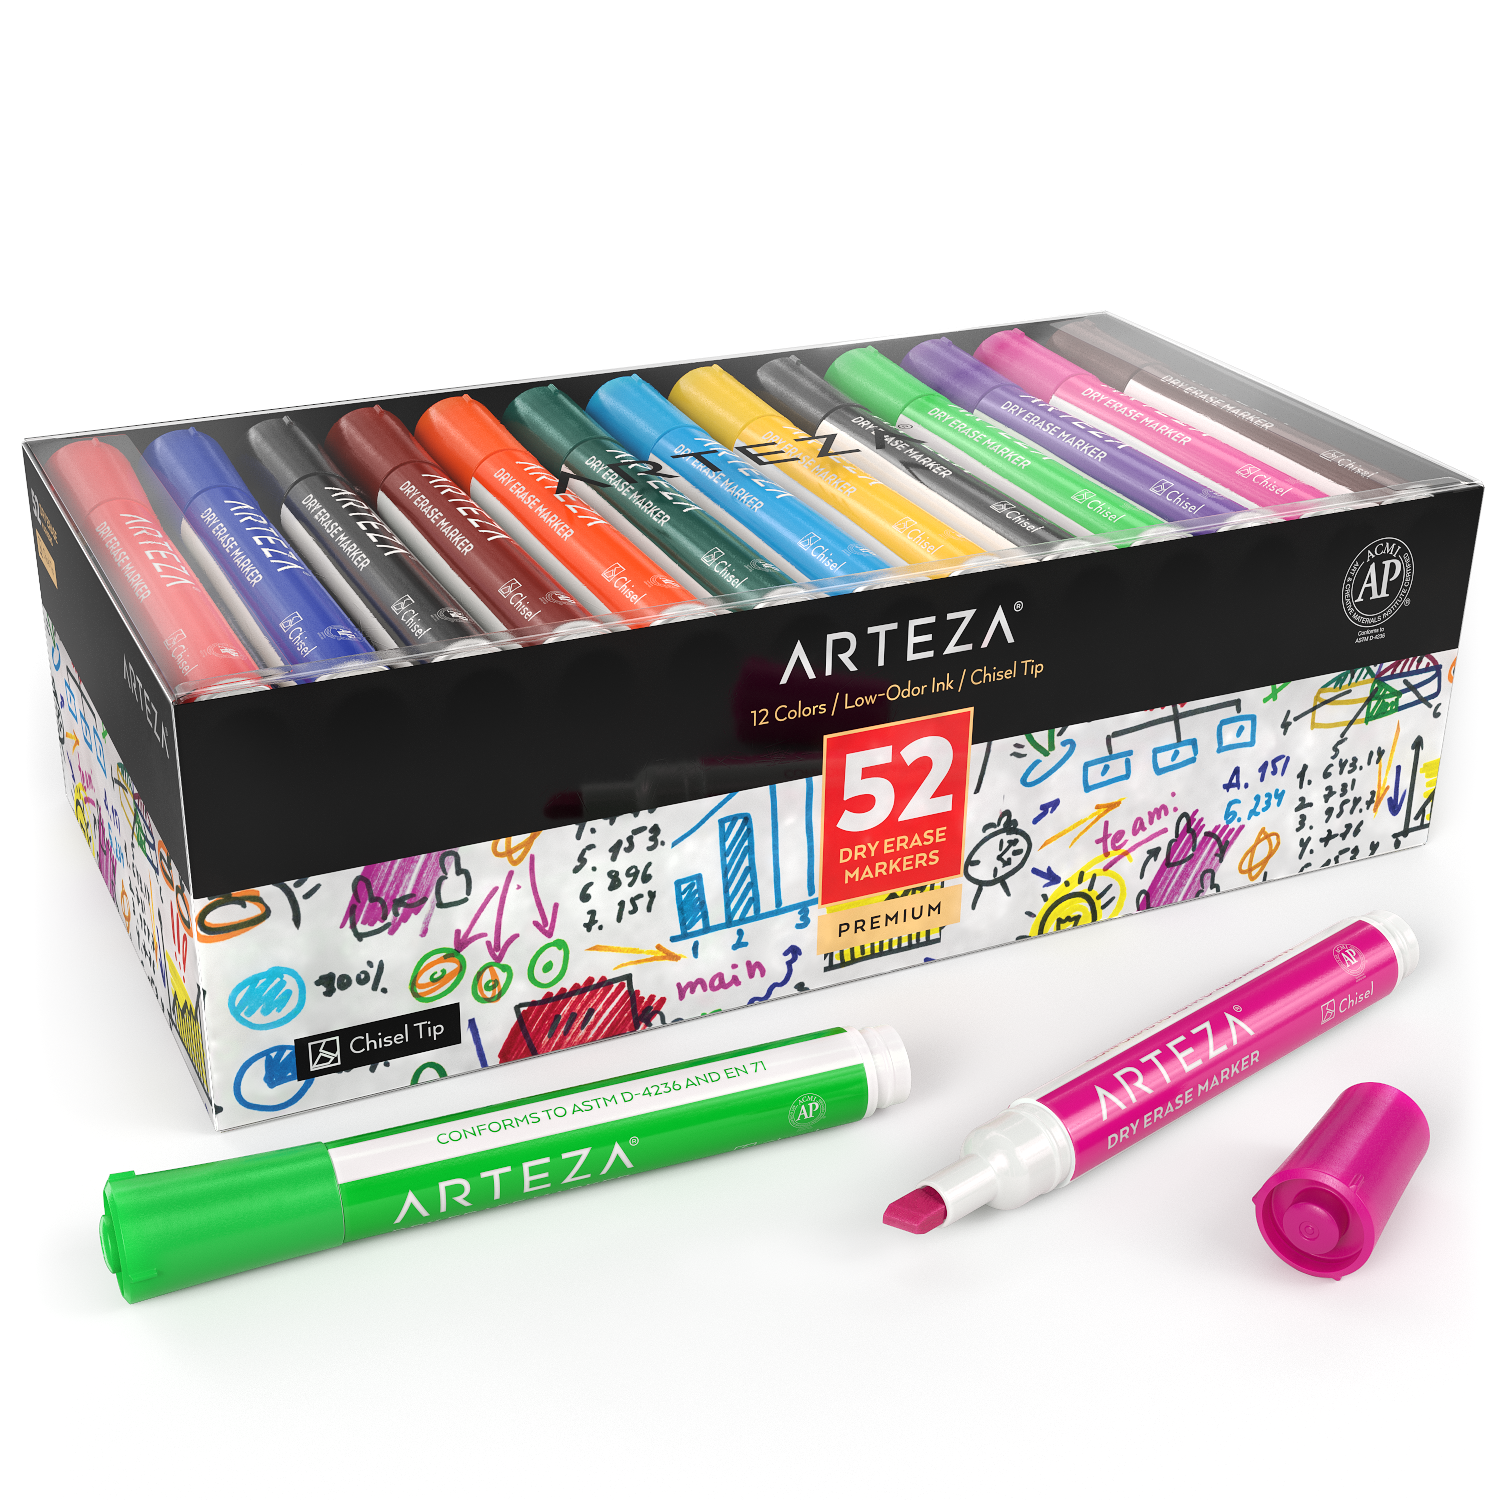 Wholesale Erase Pen Ink From Paper Ideal For Many Whiteboards 